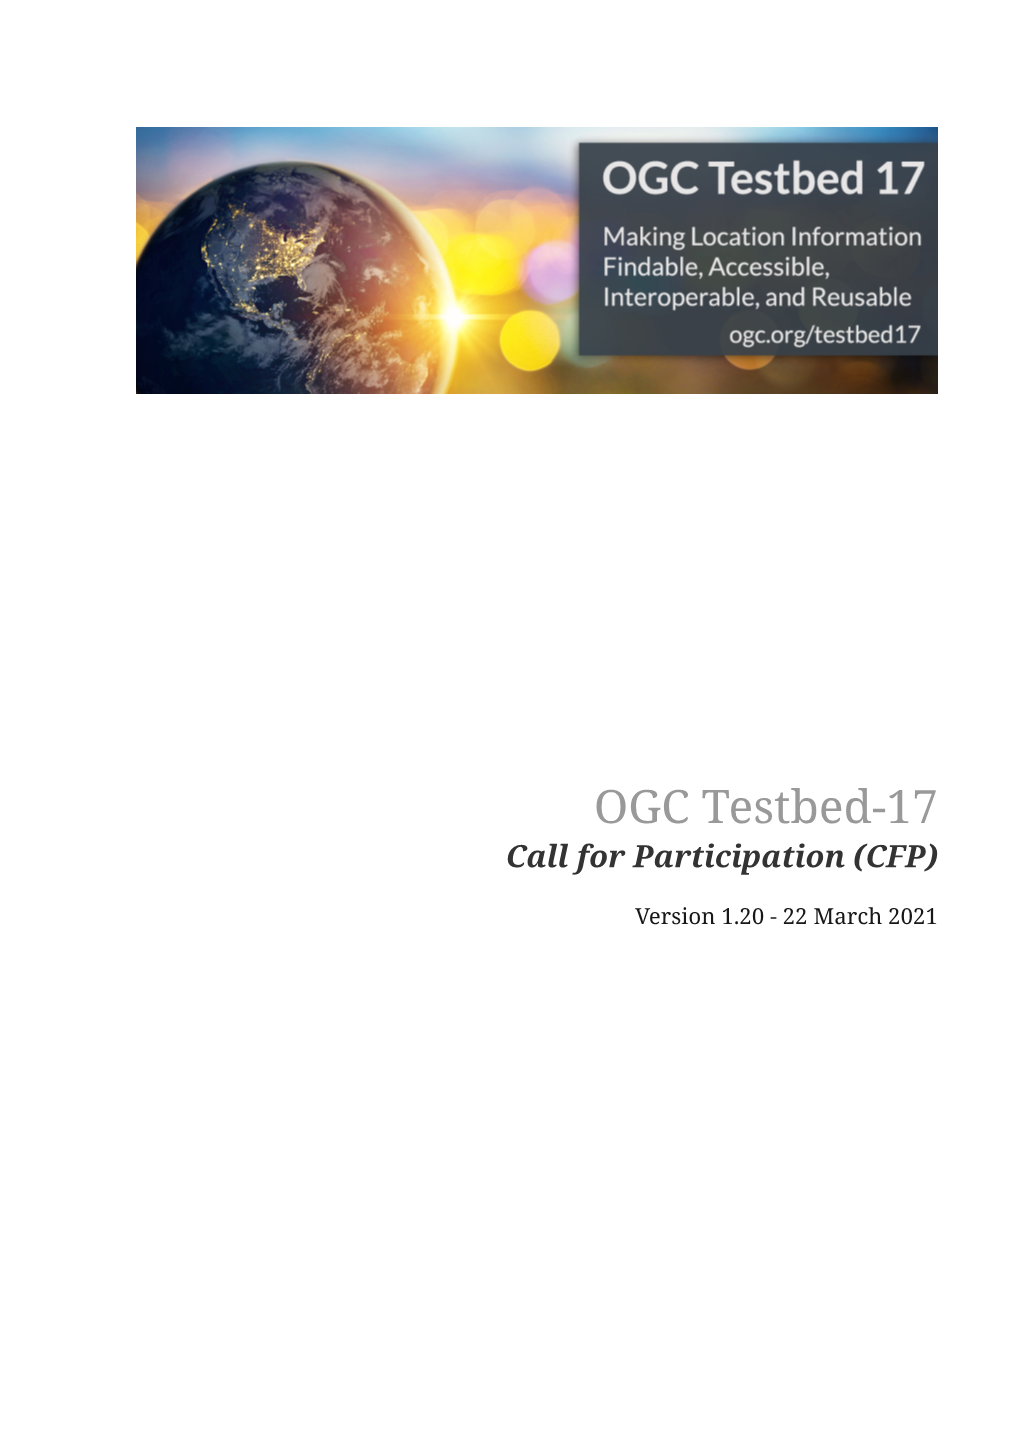 OGC Testbed-17 Call for Participation (CFP)